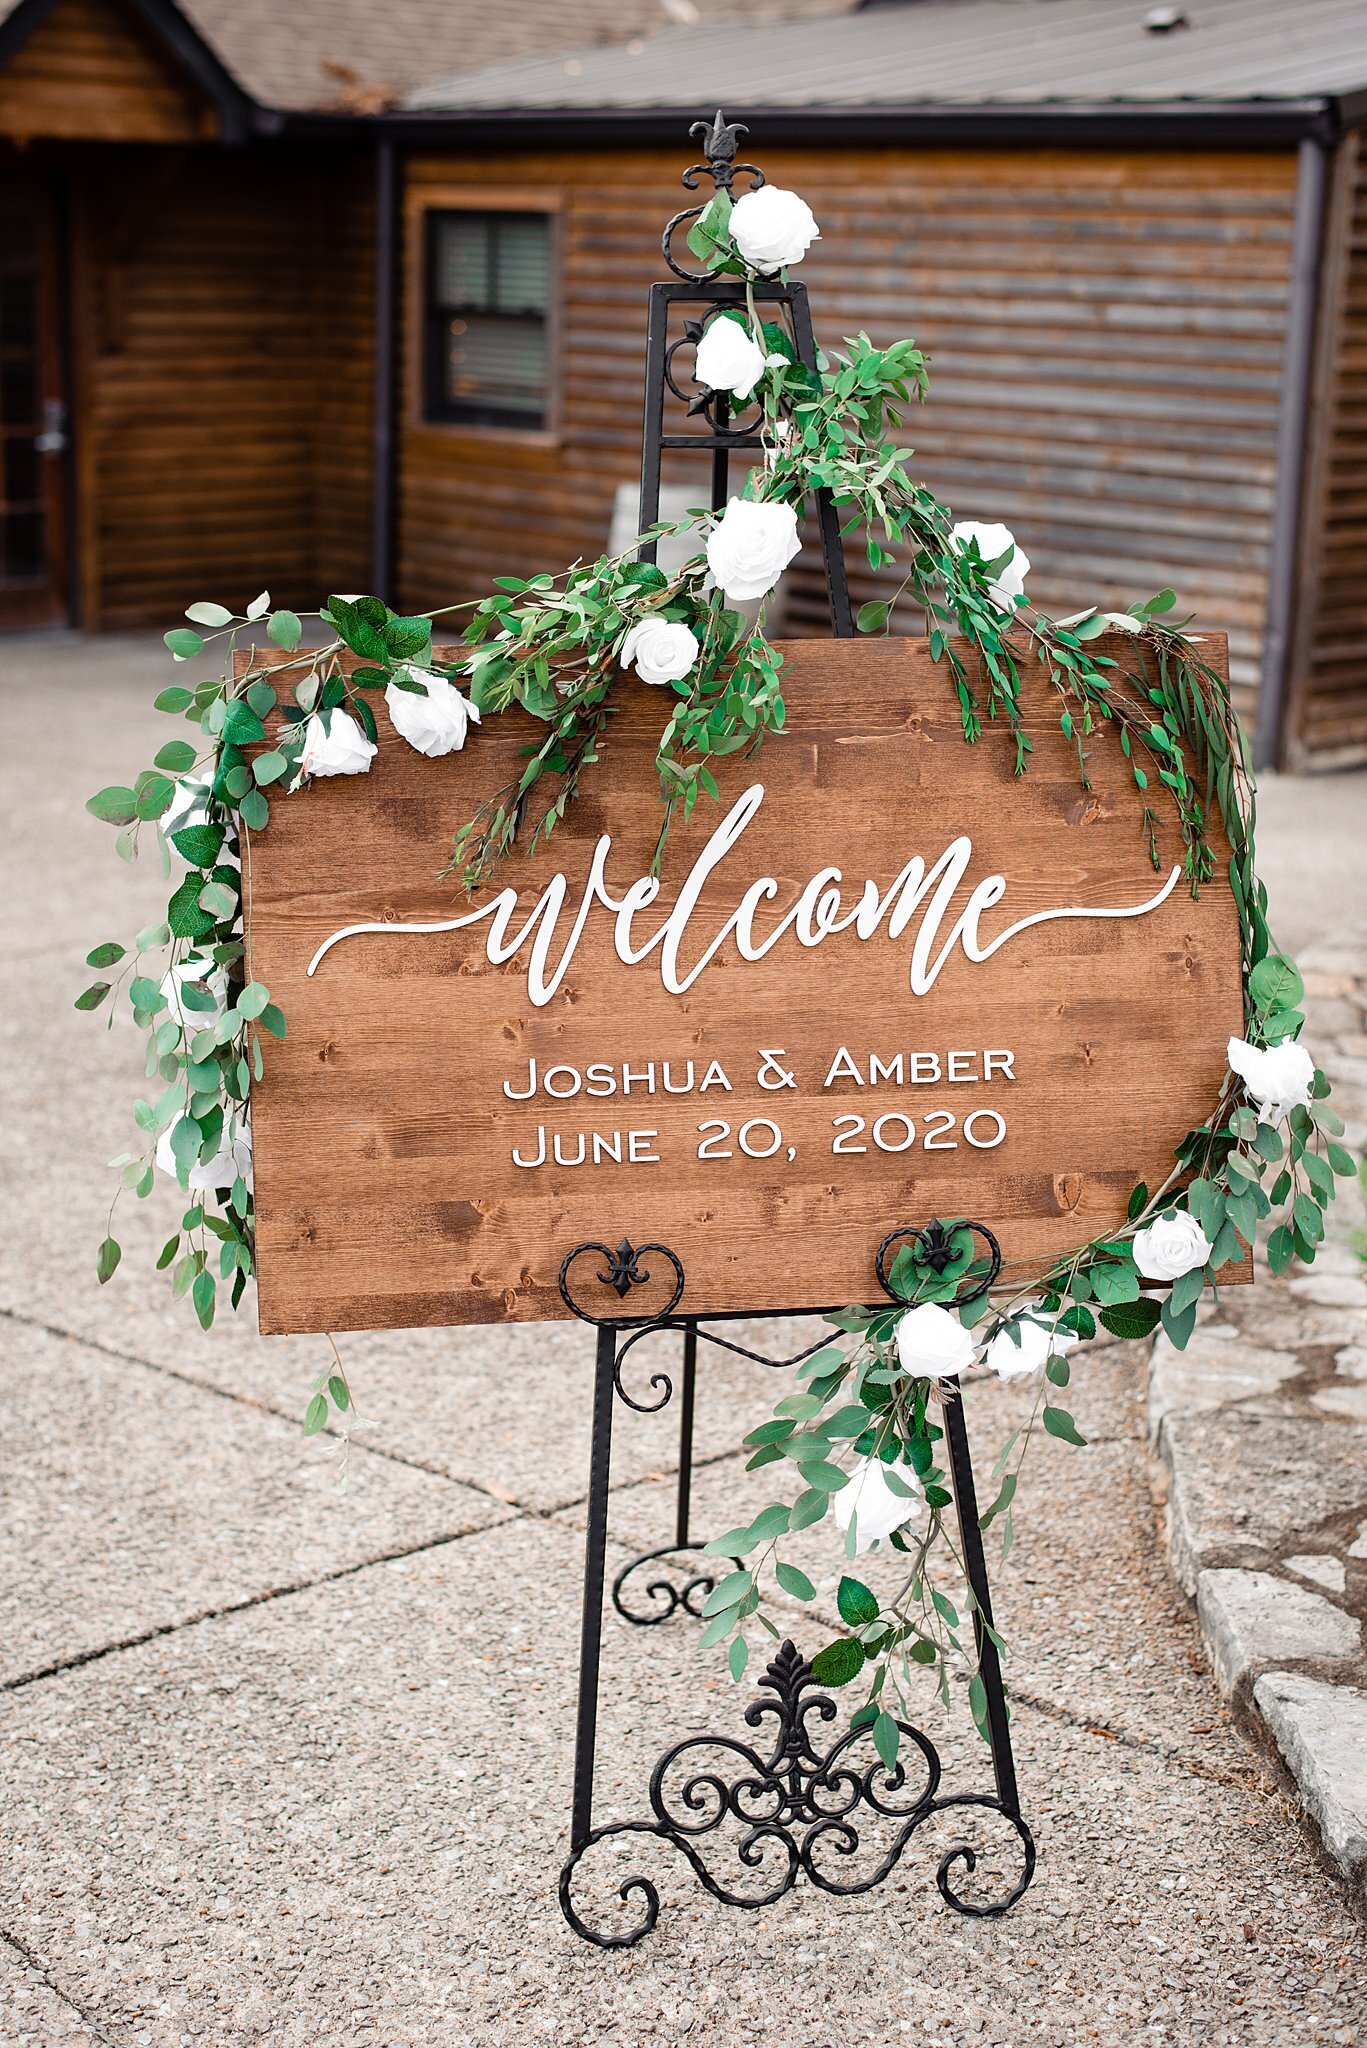 Wooden Wedding sign with custom names and date welcoming guests on their wedding day